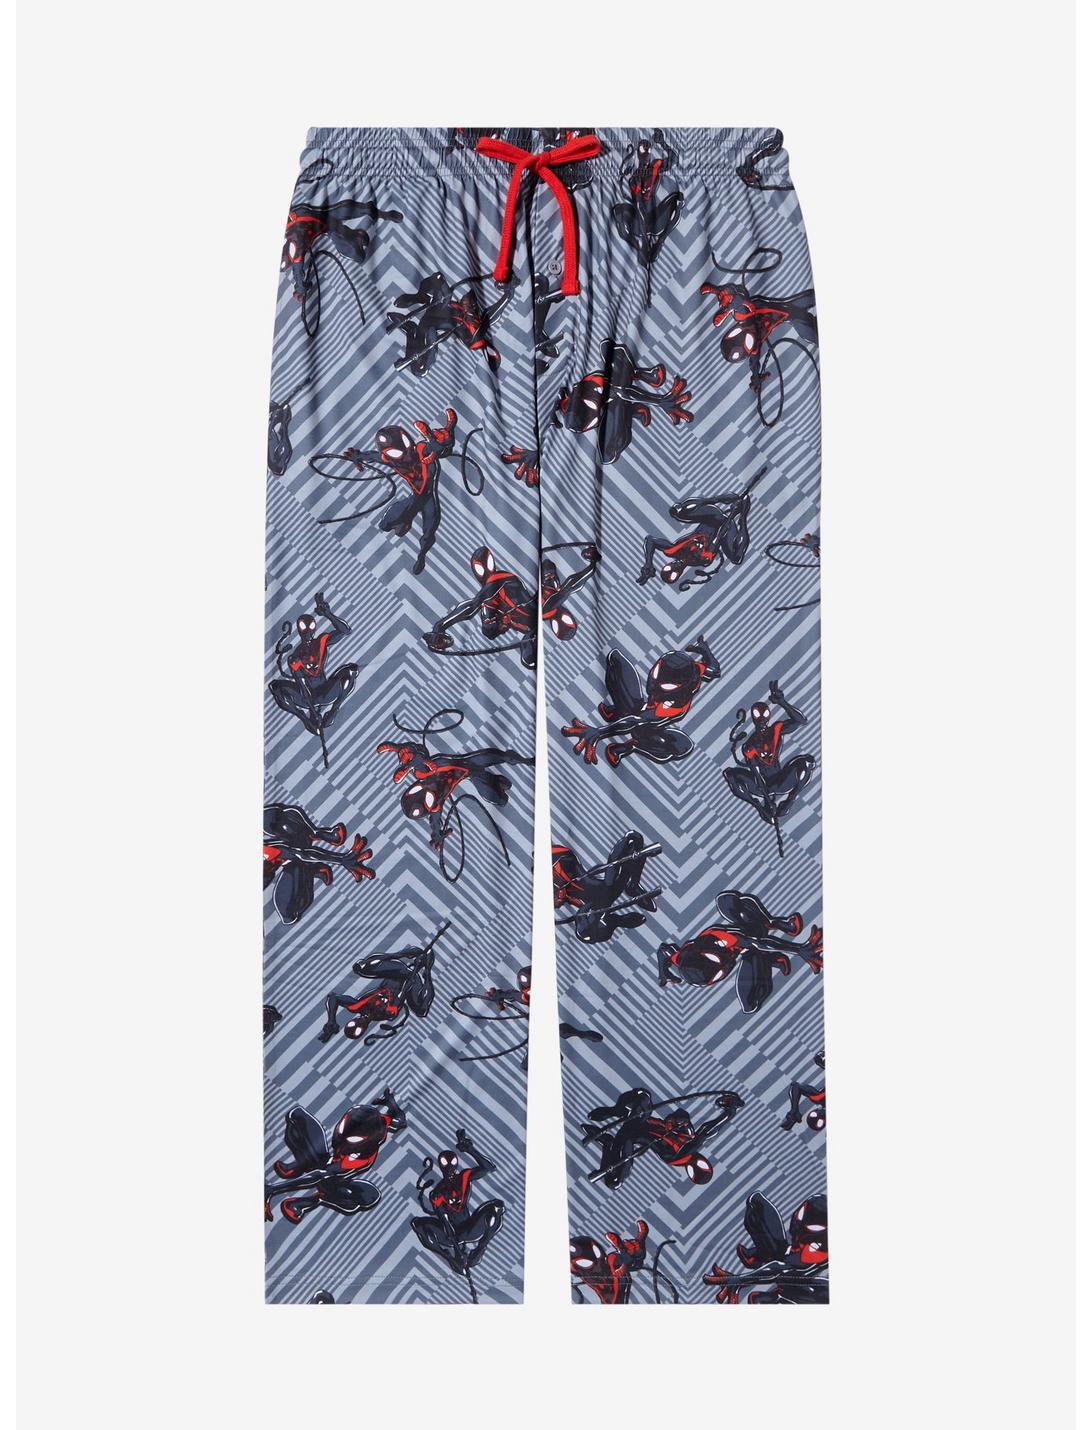 Marvel Spider-Man Miles Morales Allover Print Women's Plus Size Sleep Pants - BoxLunch Exclusive, CHARCOAL, hi-res